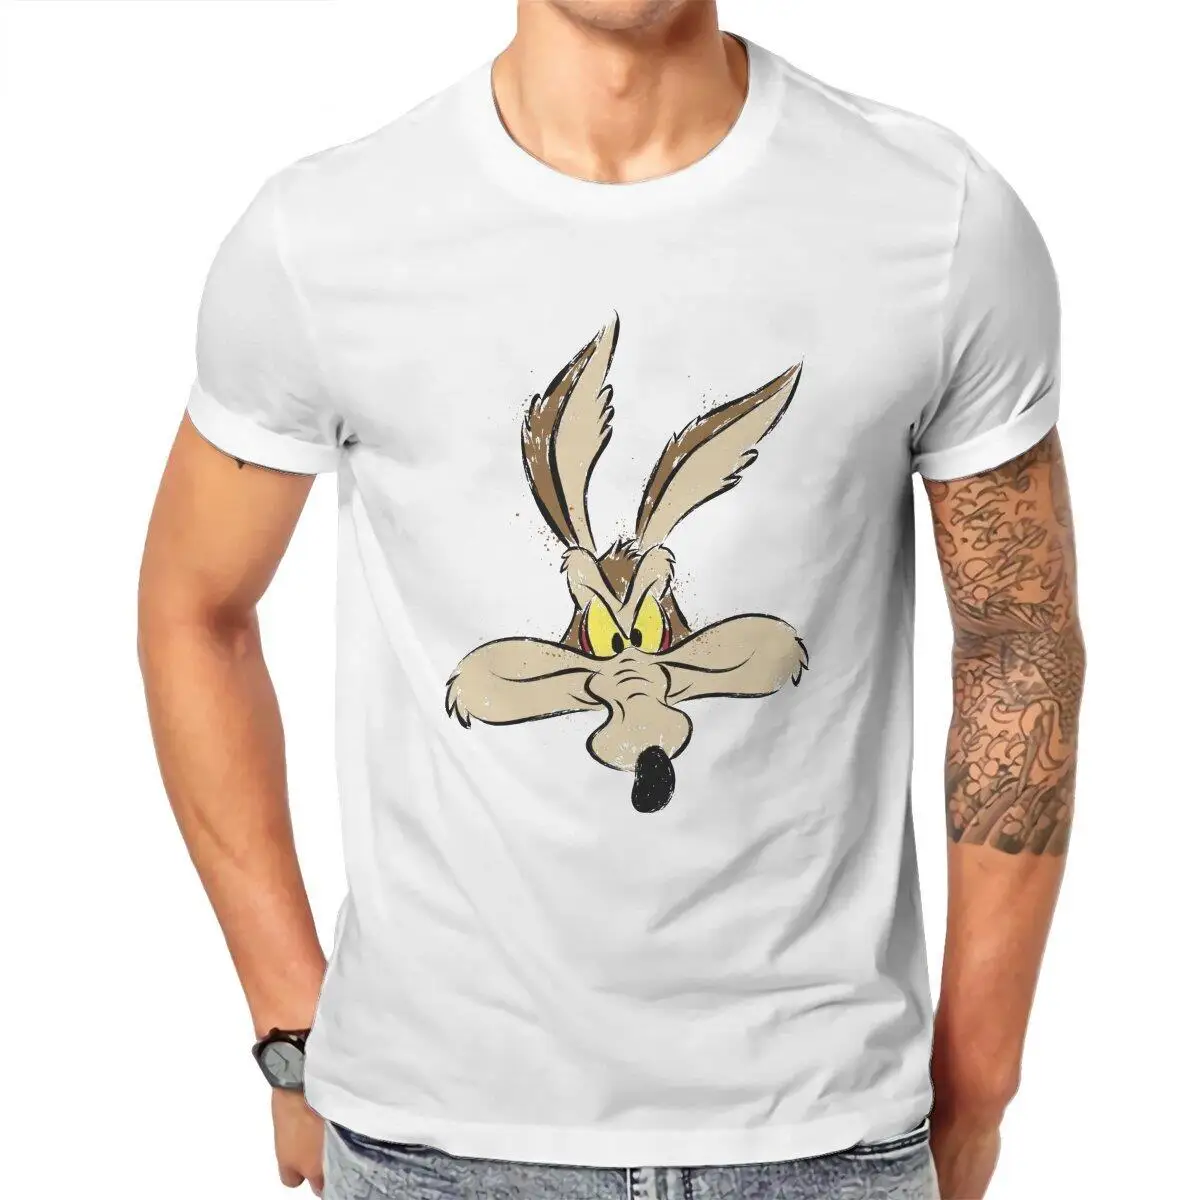 Roadrunner Coyote T-Shirts for Men  Vintage Pure Cotton Tee Shirt Round Neck Short Sleeve T Shirts Plus Size Clothing